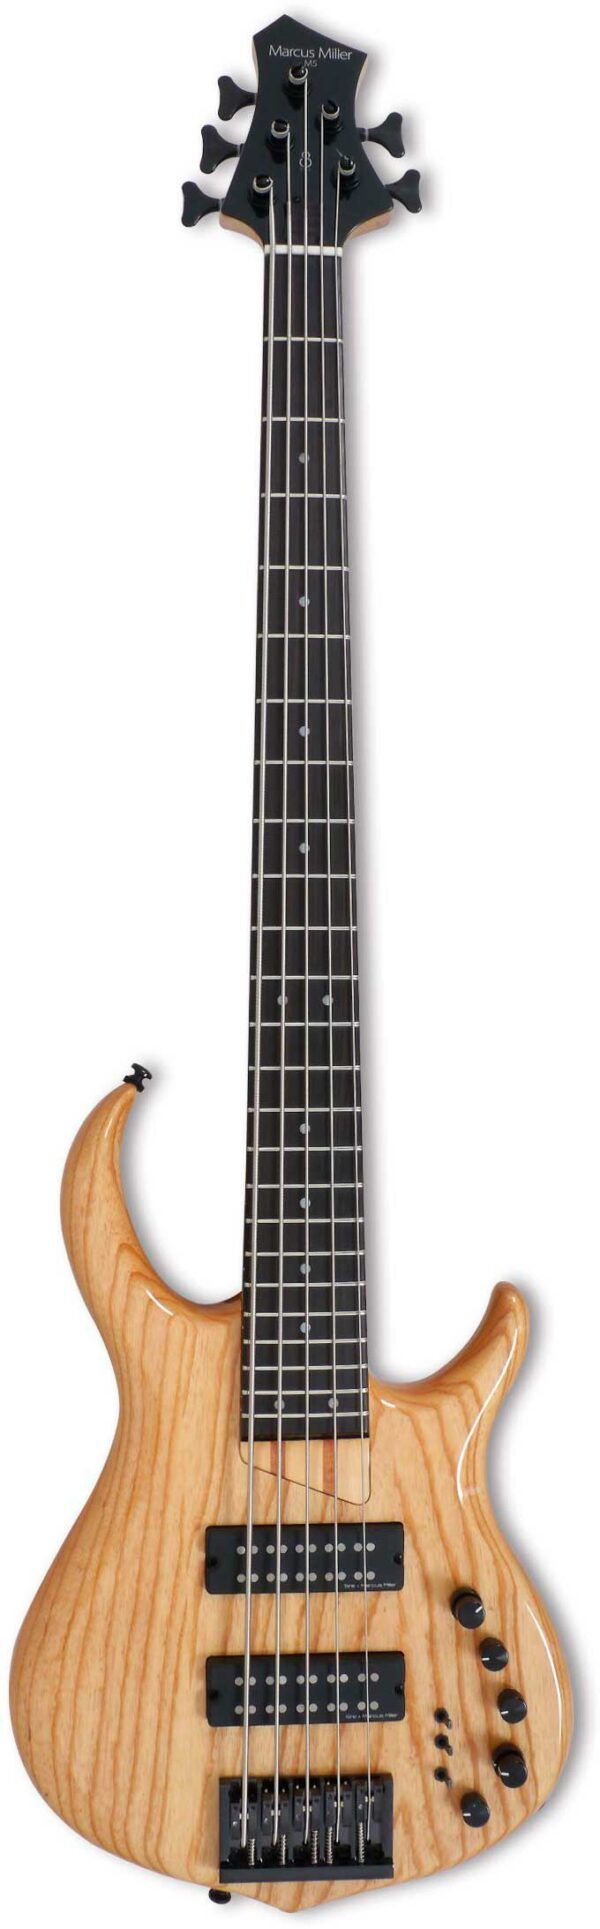 BAJO DE 5 CUERDAS Marcus Miller Bass. 2nd Gen. 5 cuerdas. Body Material: Swamp Ash. Body Shape: New Modern Bass. Neck Material: Maple/Mahogany 5 piece Neck. Neck Shape: C-Shape. Scale: 34”-35“(For 5 string 35” for clear low B). Neck Joint: 4 Bolt Individual Bushing Type. Fingerboard: Ebony(Rolled Edges). Fingerboard Radius: 12”. Frets: Medium